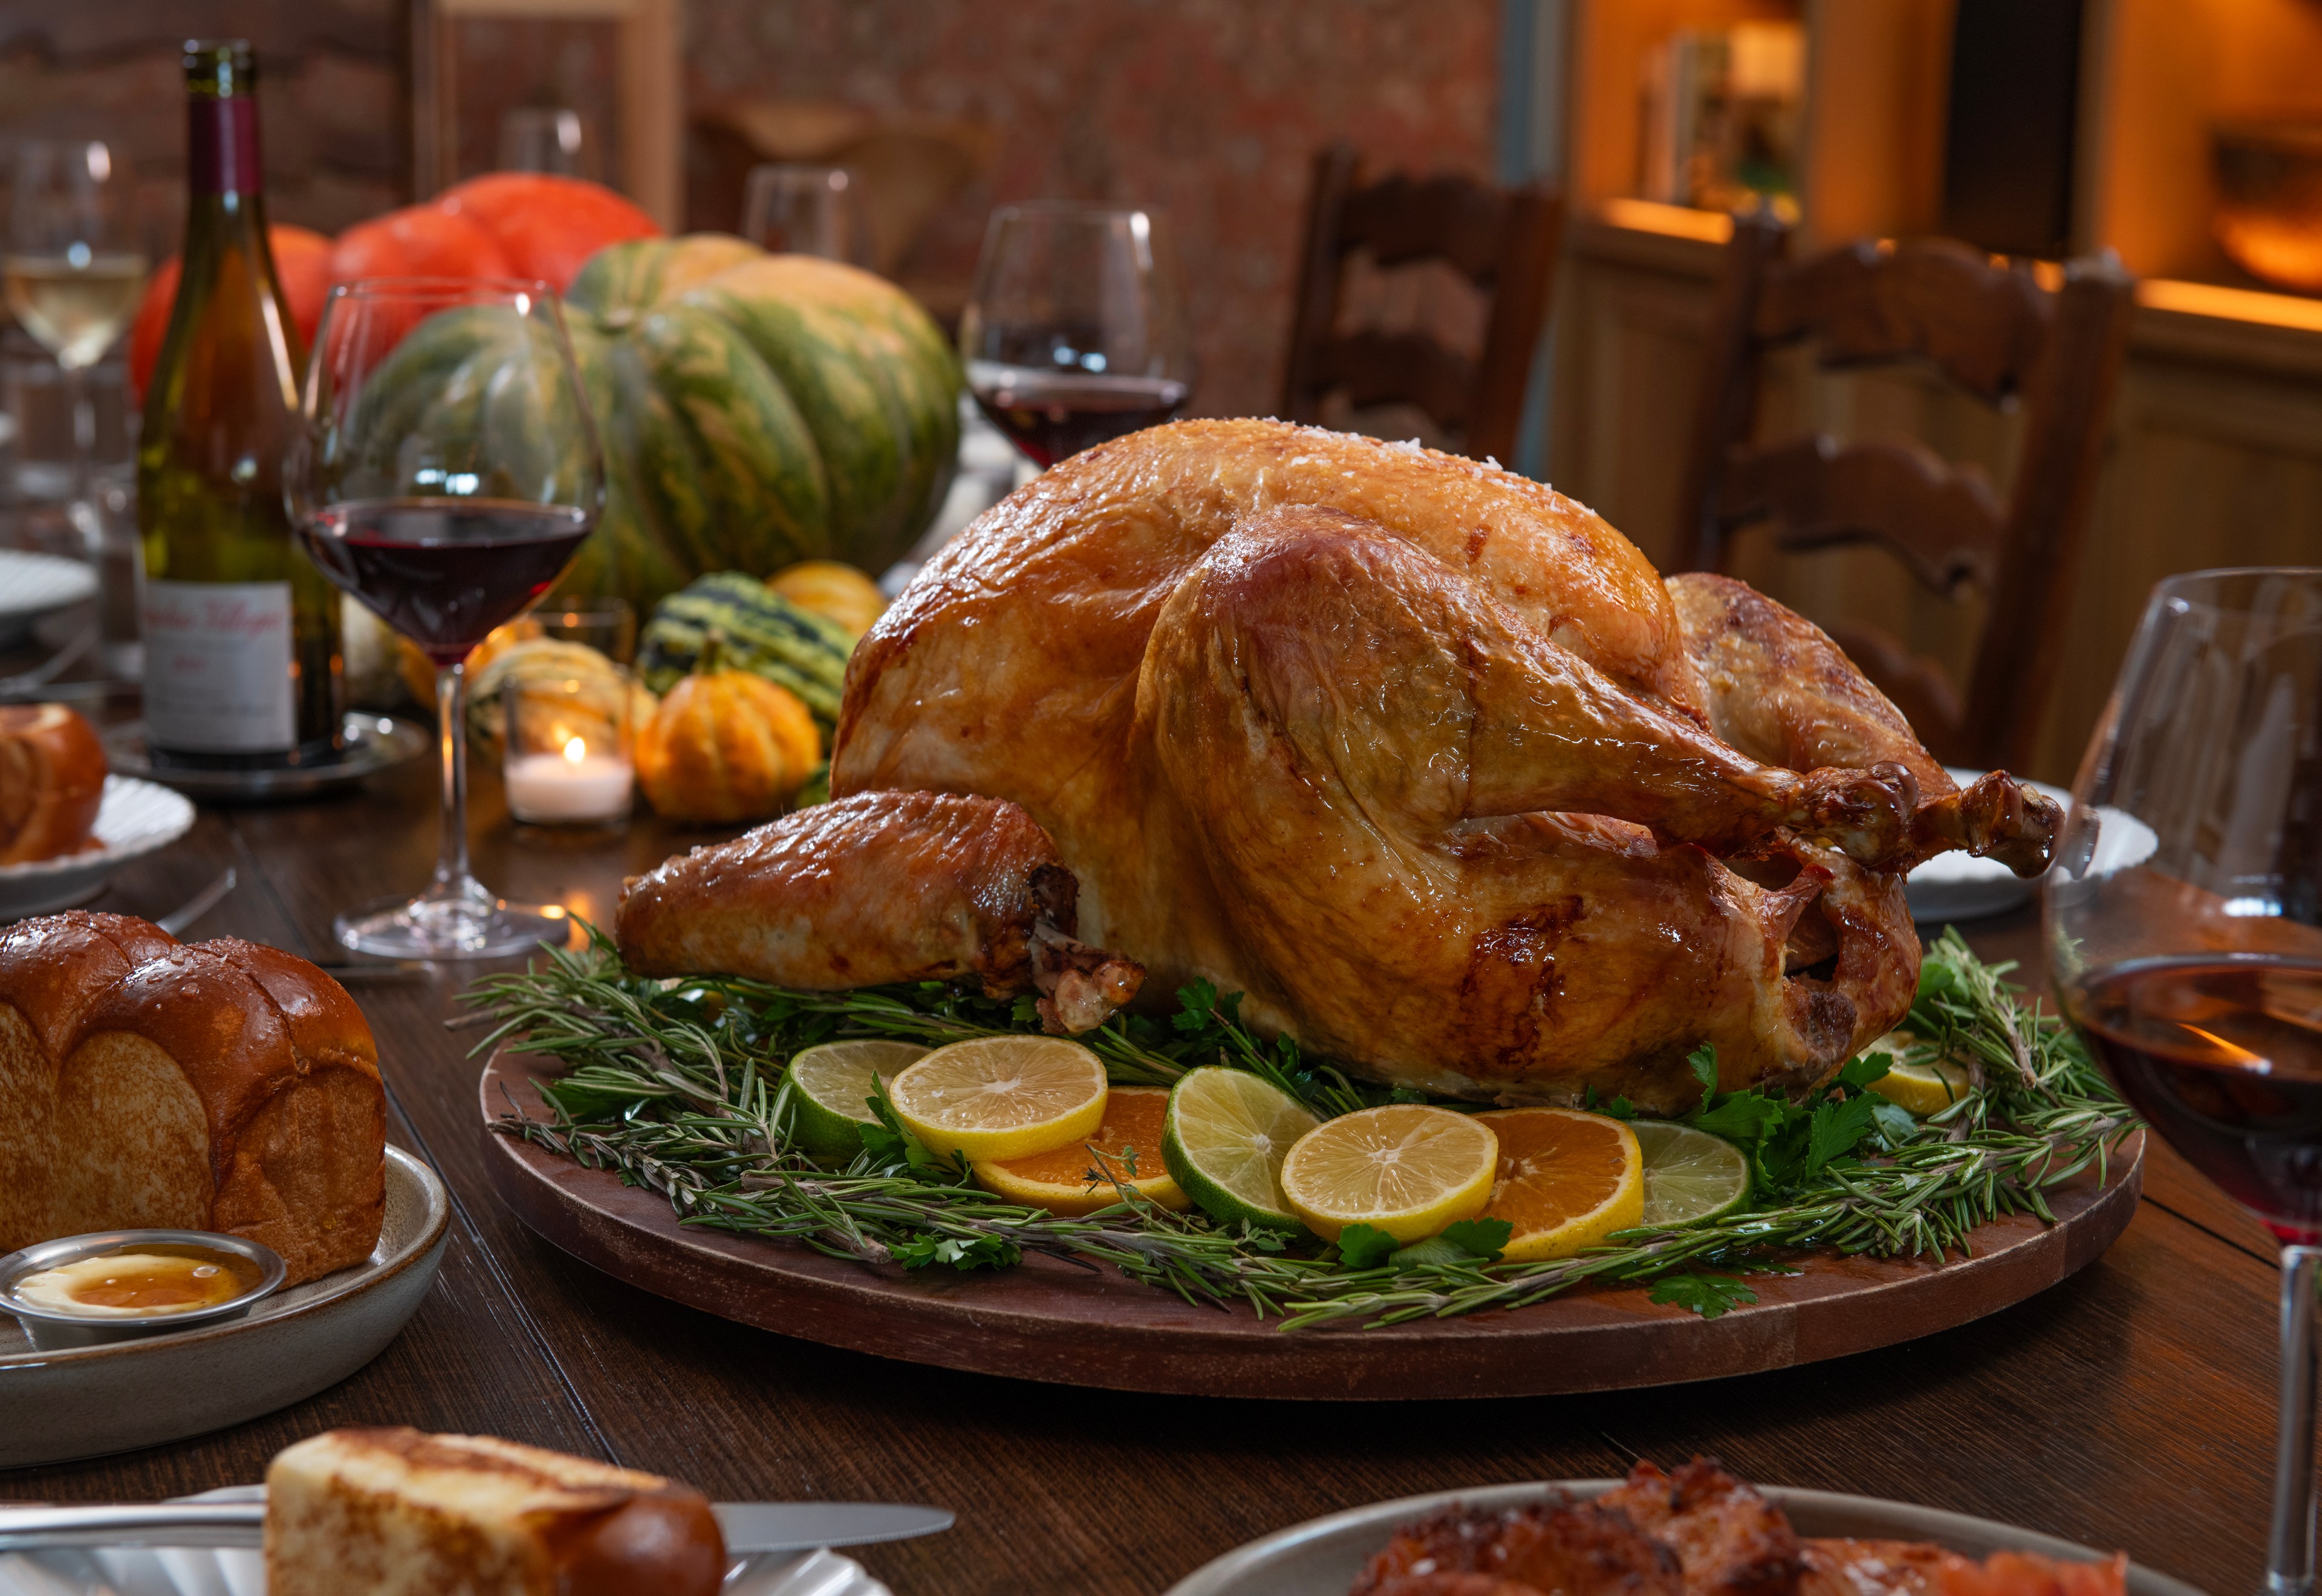 A picture of a whole cooked turkey on a dinner table full of dishes, including bread and wine.